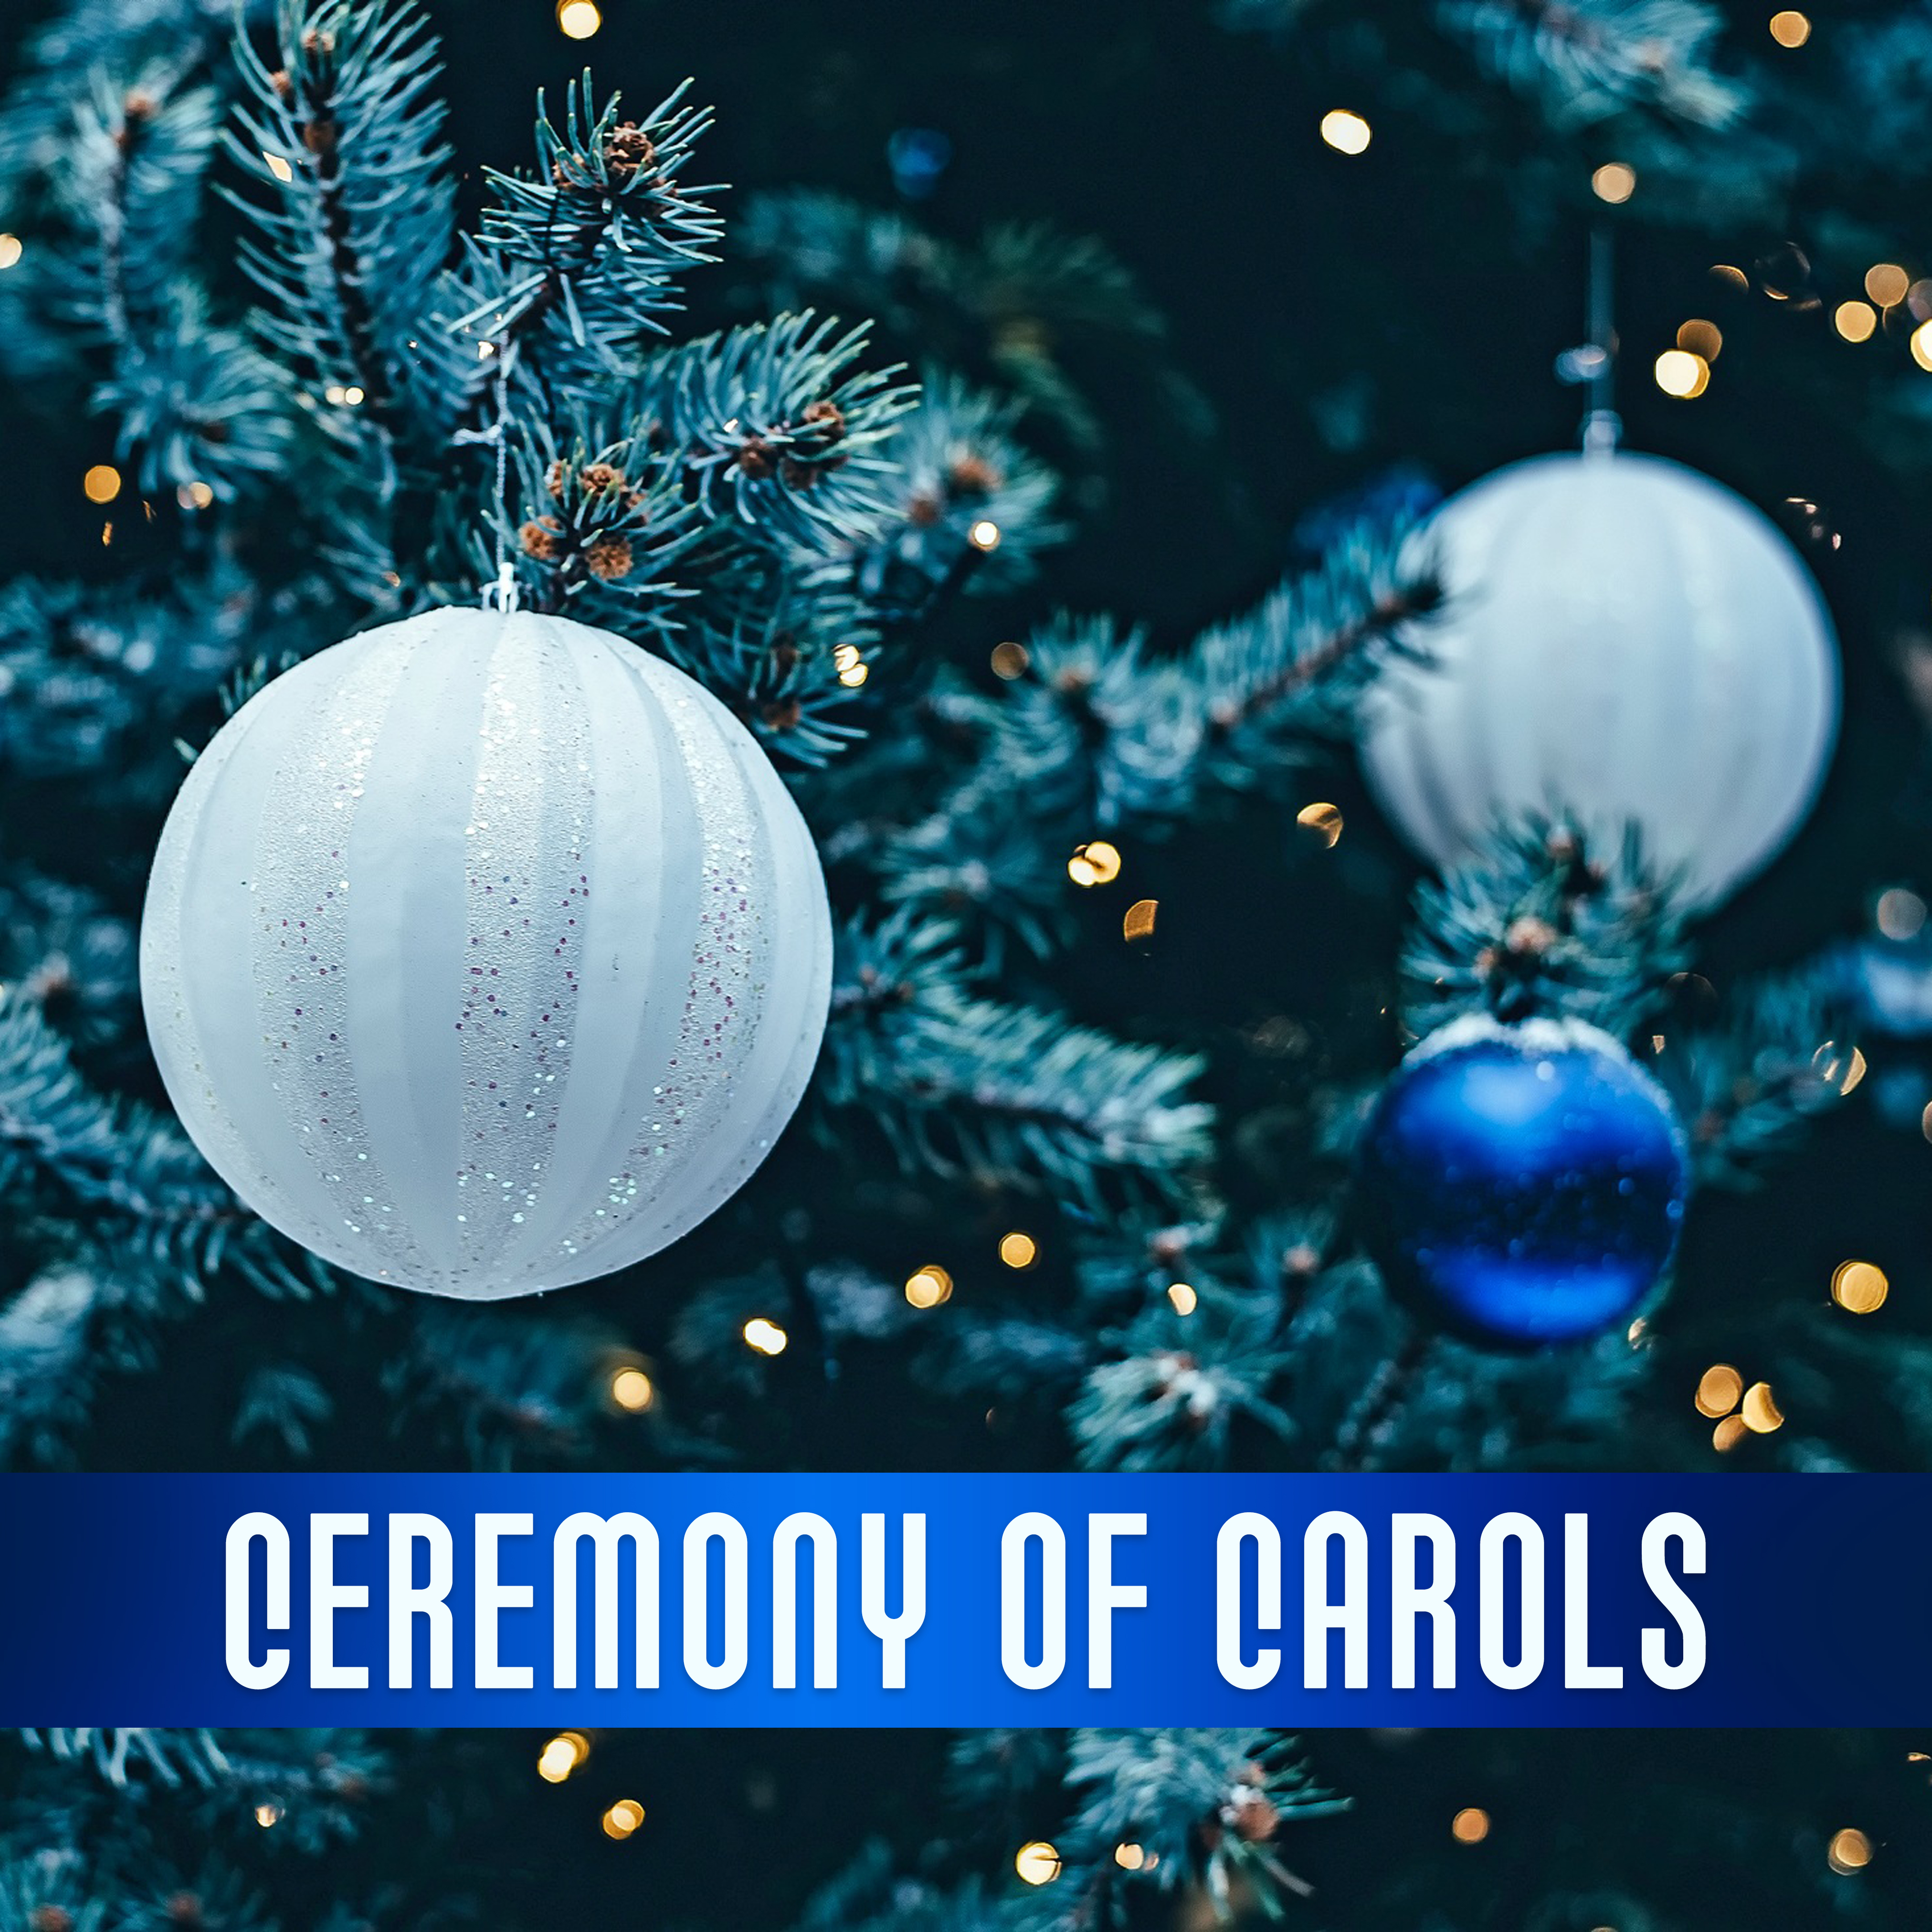 Ceremony of Carols  The Most Beautiful Christmas Carols, Traditional Songs, White Christmas, Falling Snow, Magic Star, Christmas Atmosphere